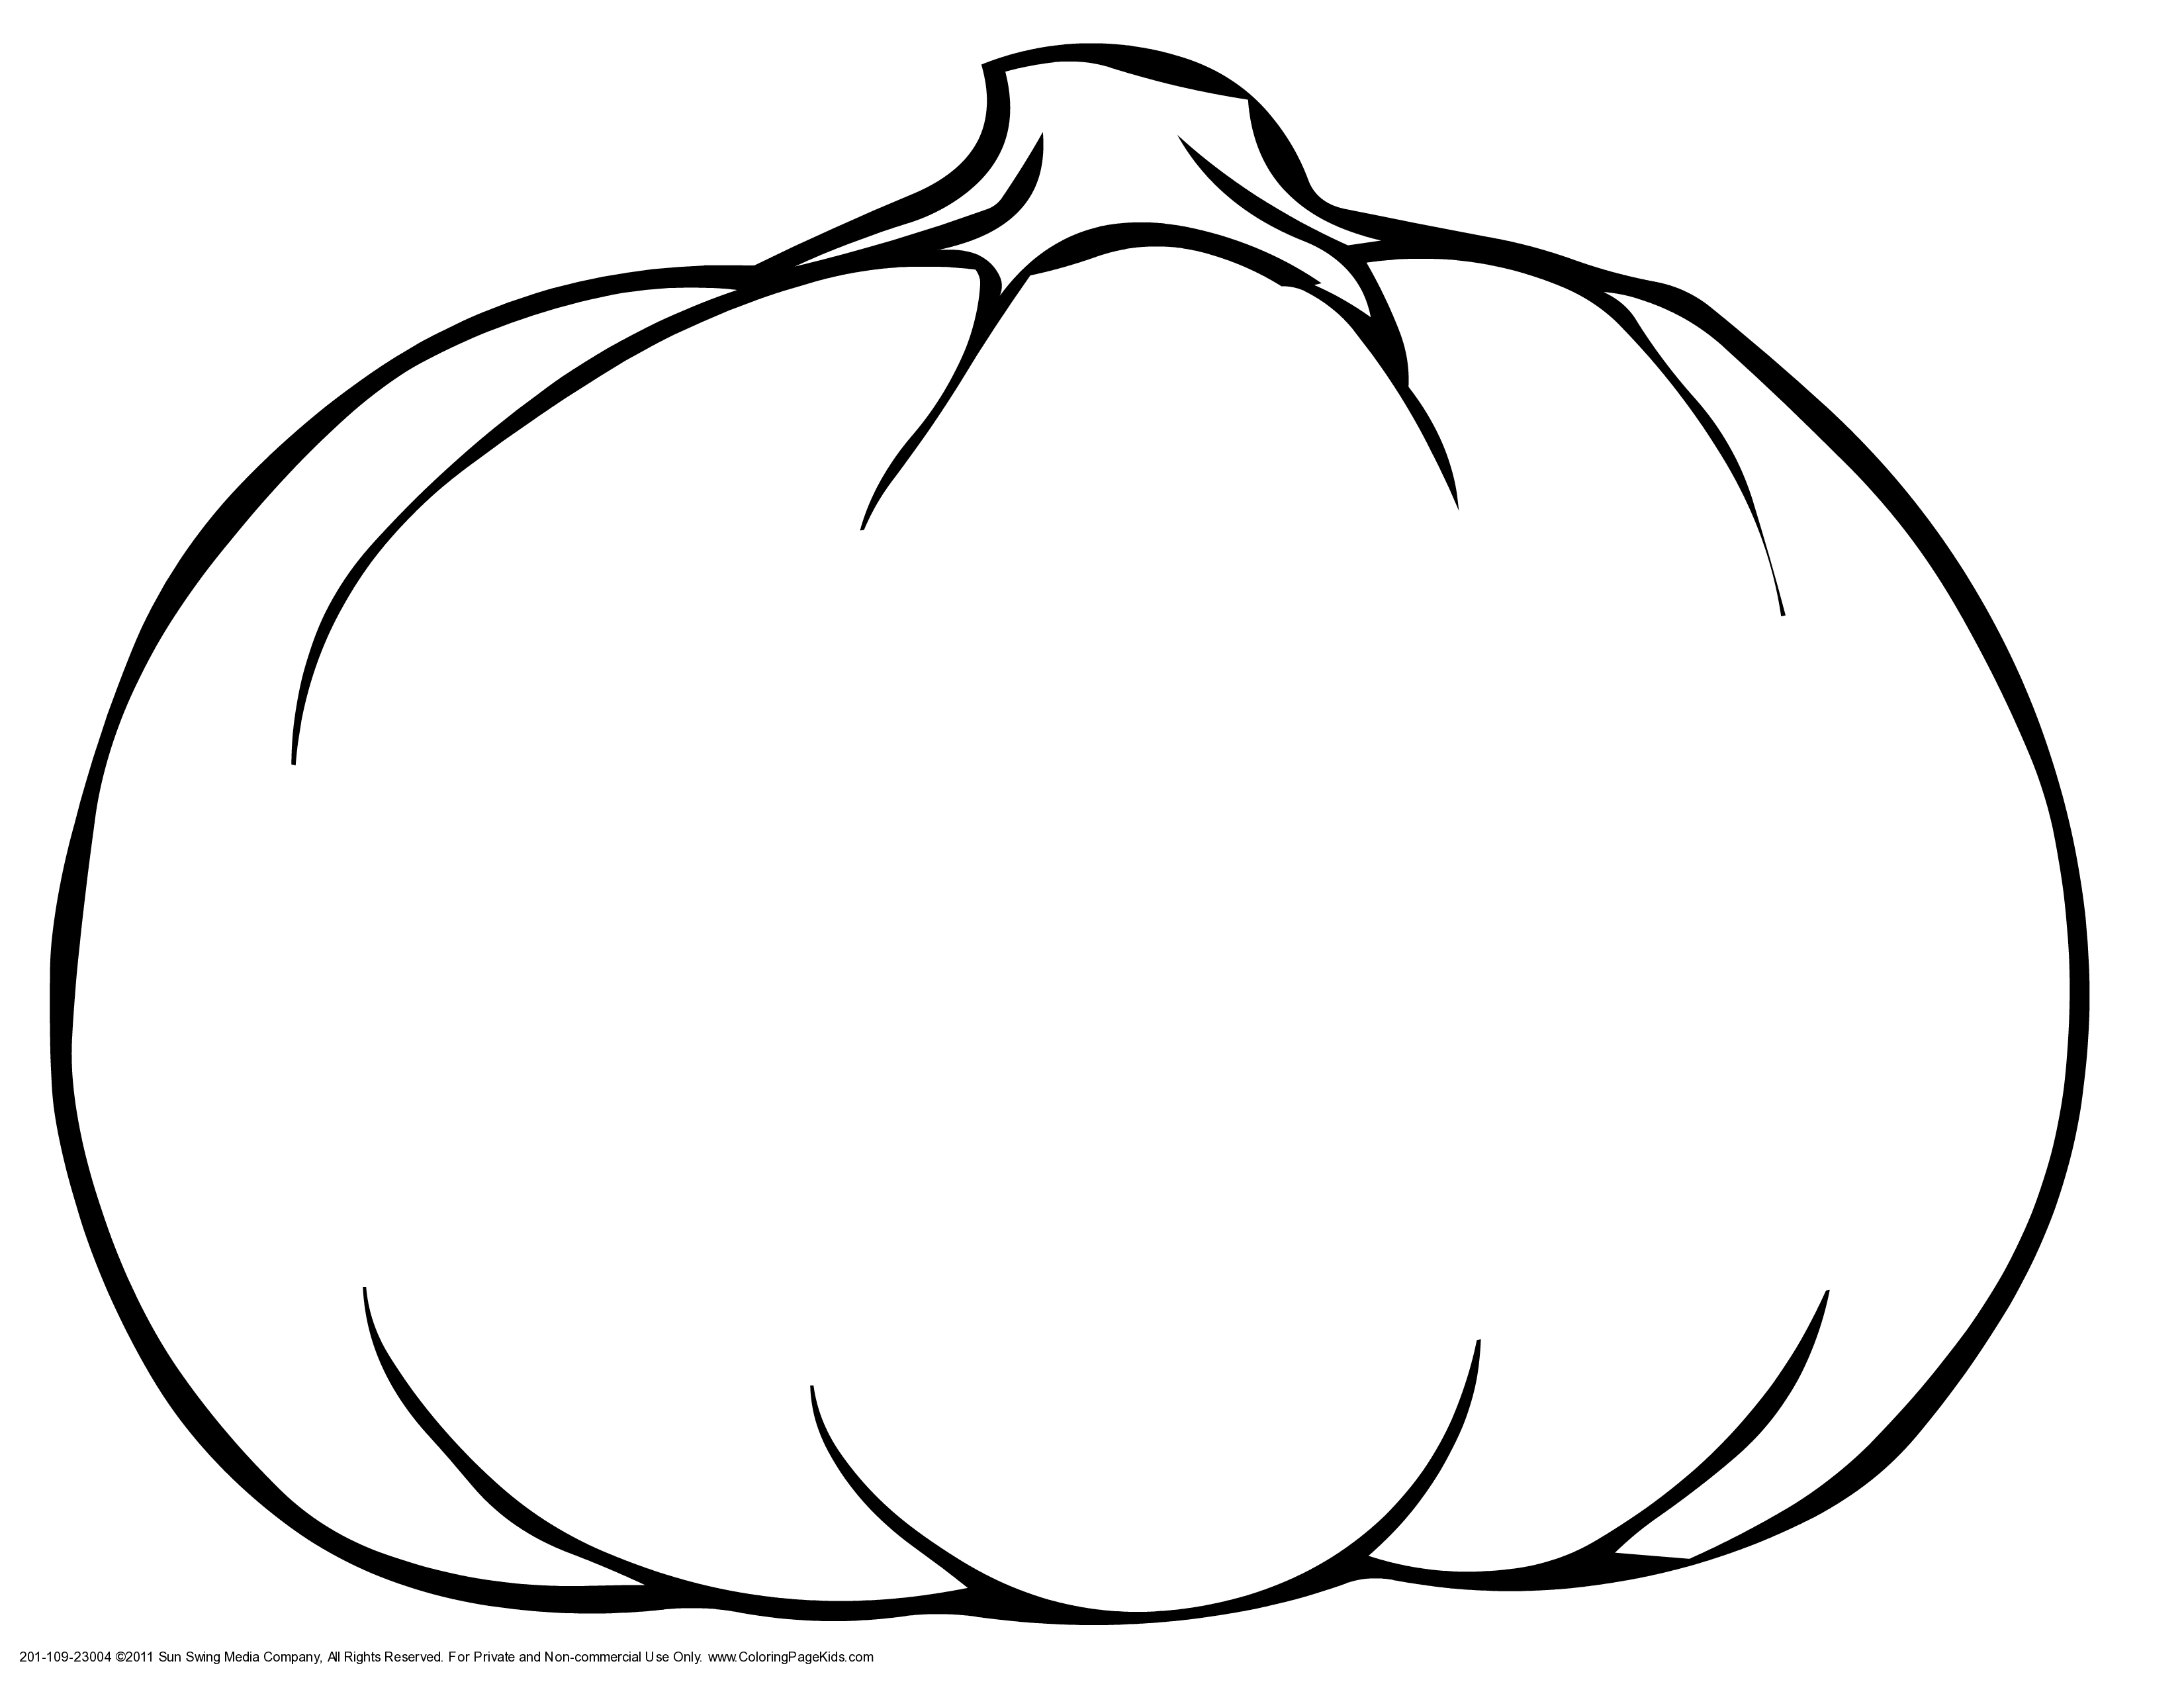 Pumpkin Patch Coloring Page | Clipart library - Free Clipart Images